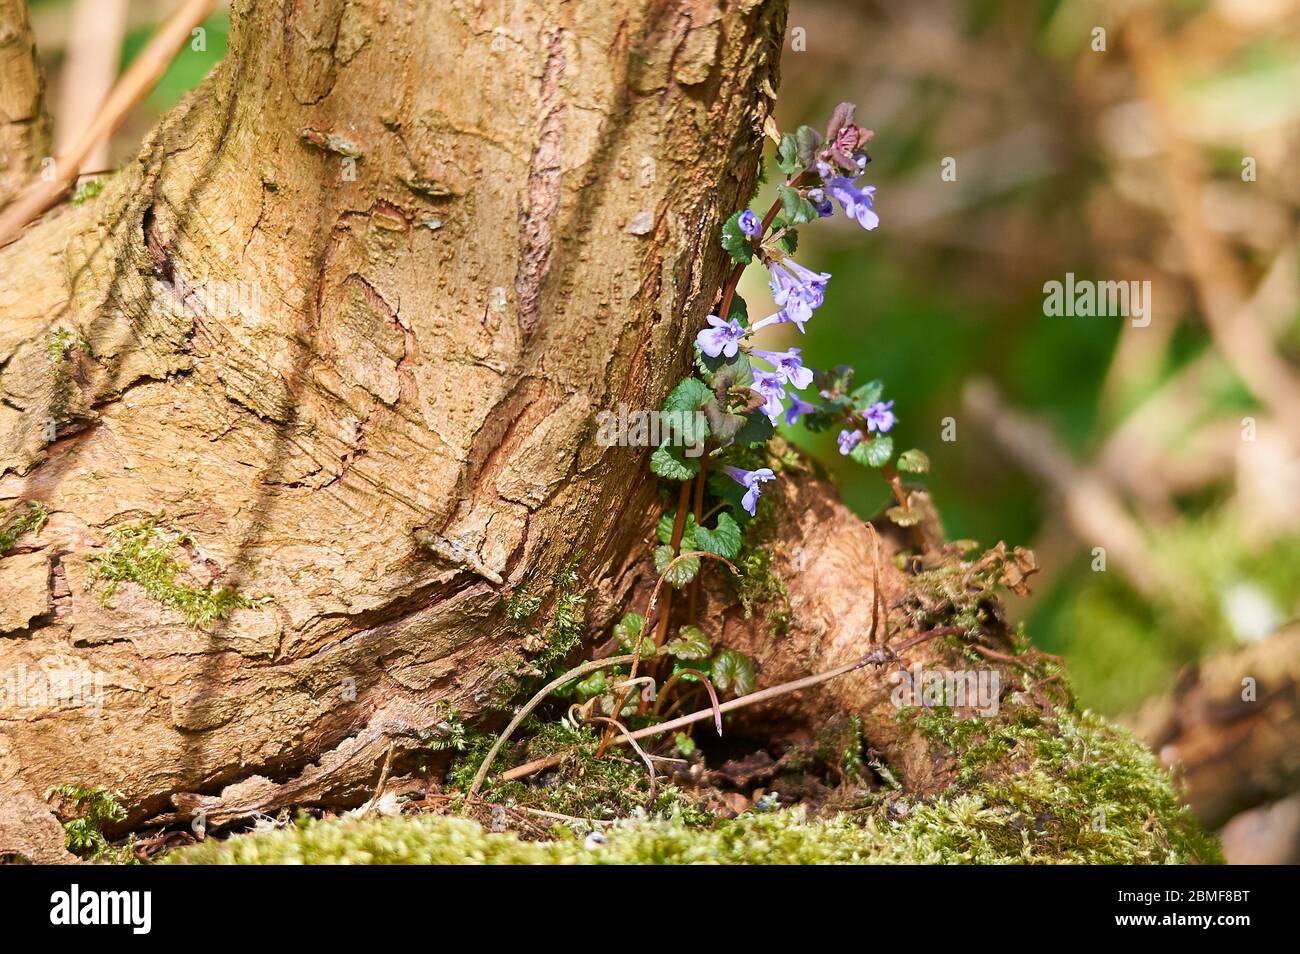 A blooming Alehoof, also called Creeping Charlie, nestled into the root-work of a tree Stock Photo